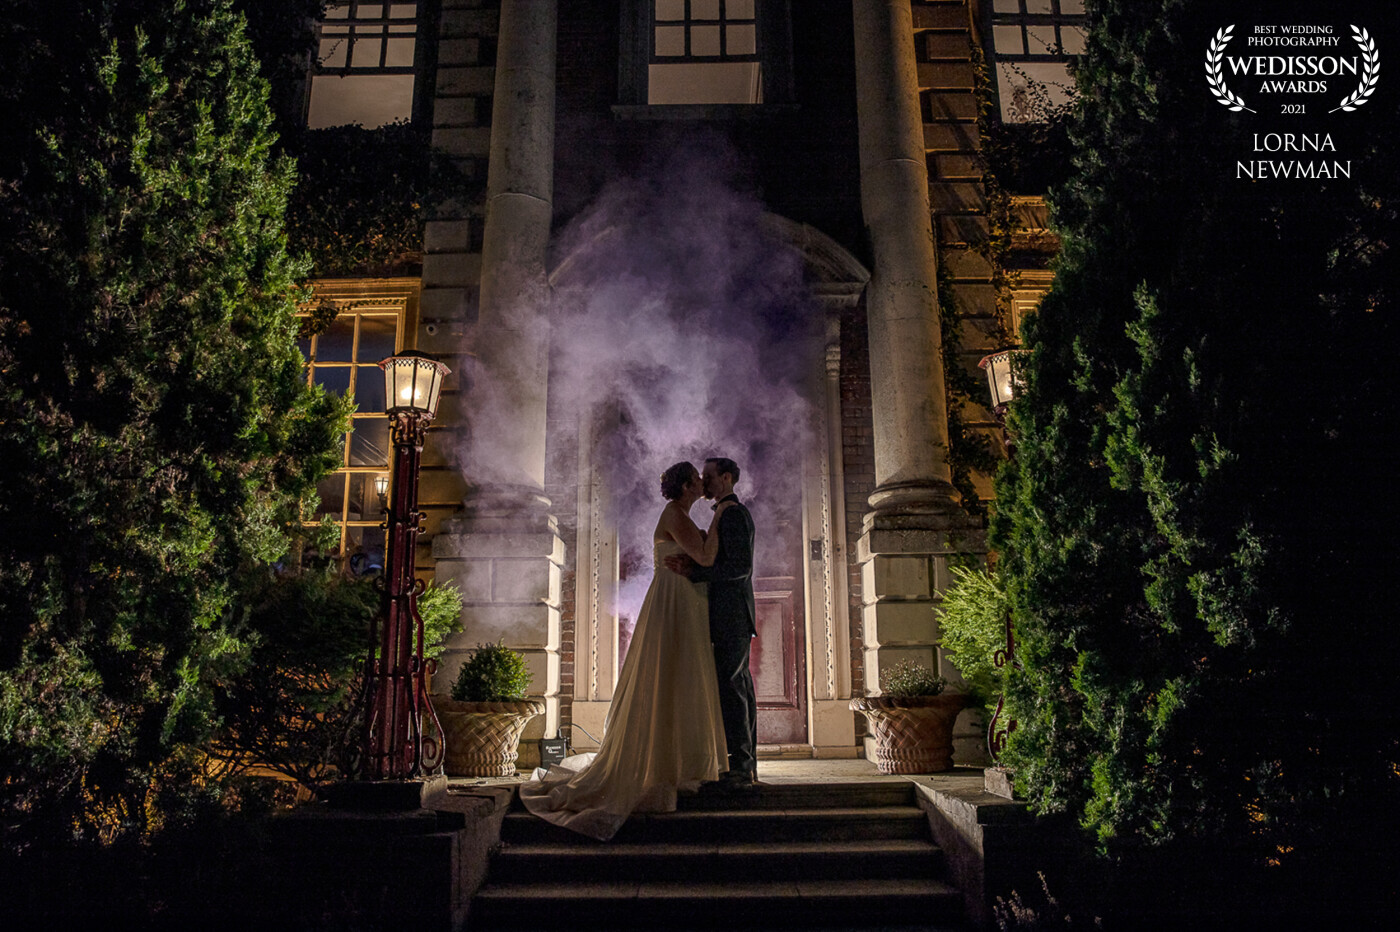 One of the last shots of the evening just before Anstey Hall closes its doors for the final time, so we decided to make it as romantic as possible. Congraulations Kathryn & Ryan's what a beautiful day so happy for you both.